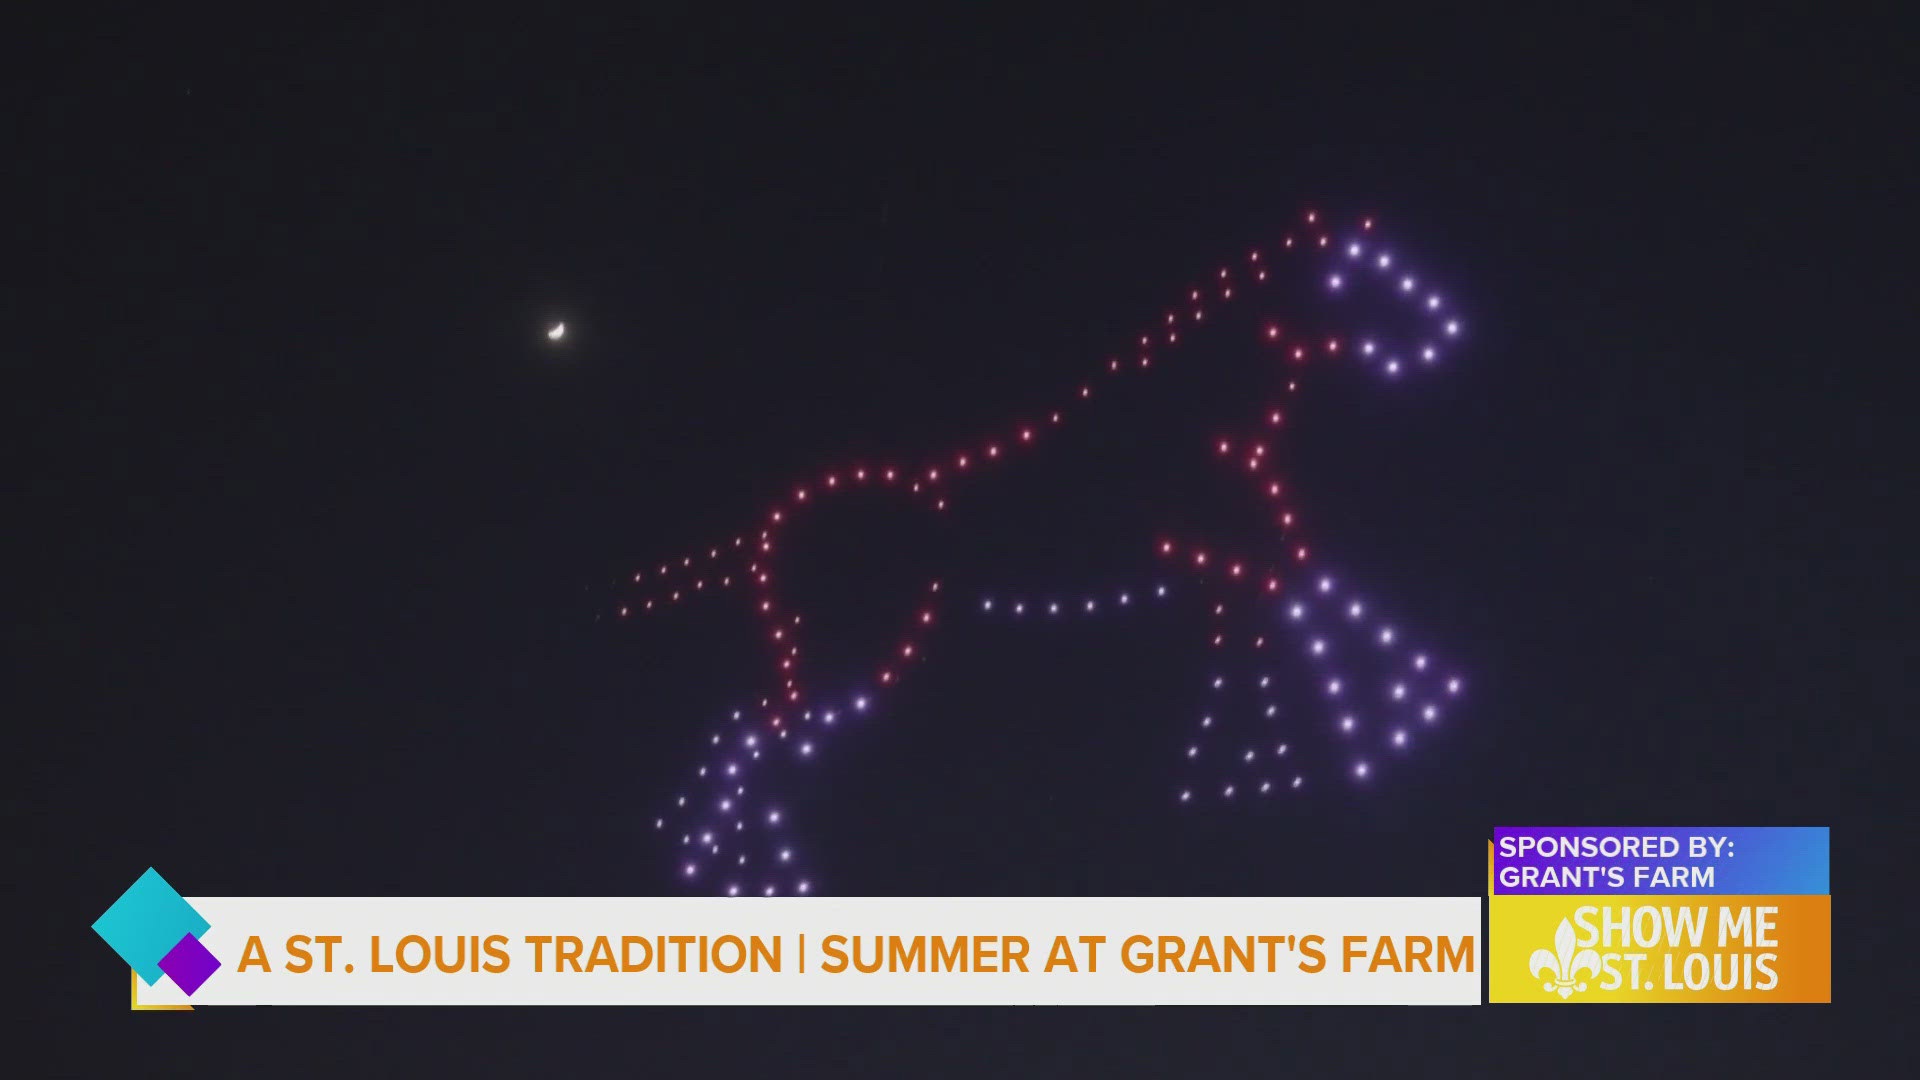 Summer nights at Grant's Farm is back and is bigger and better than ever before!